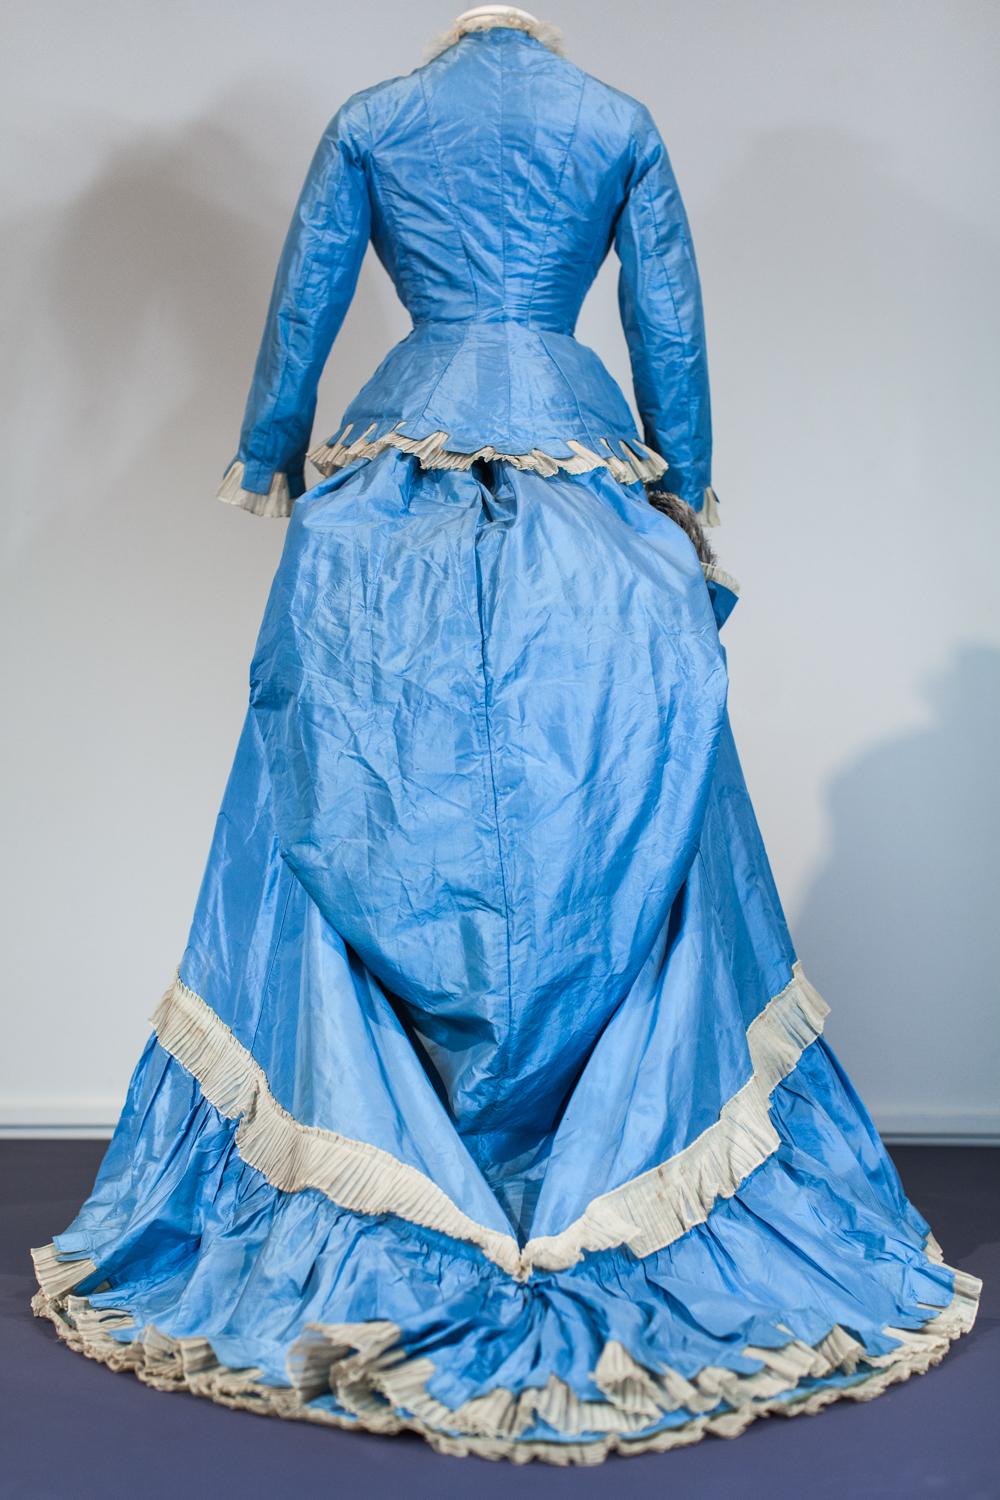 Women's A French Victorian Bustle Day Dress and Pouf in Sky-blue Taffeta Circa 1875